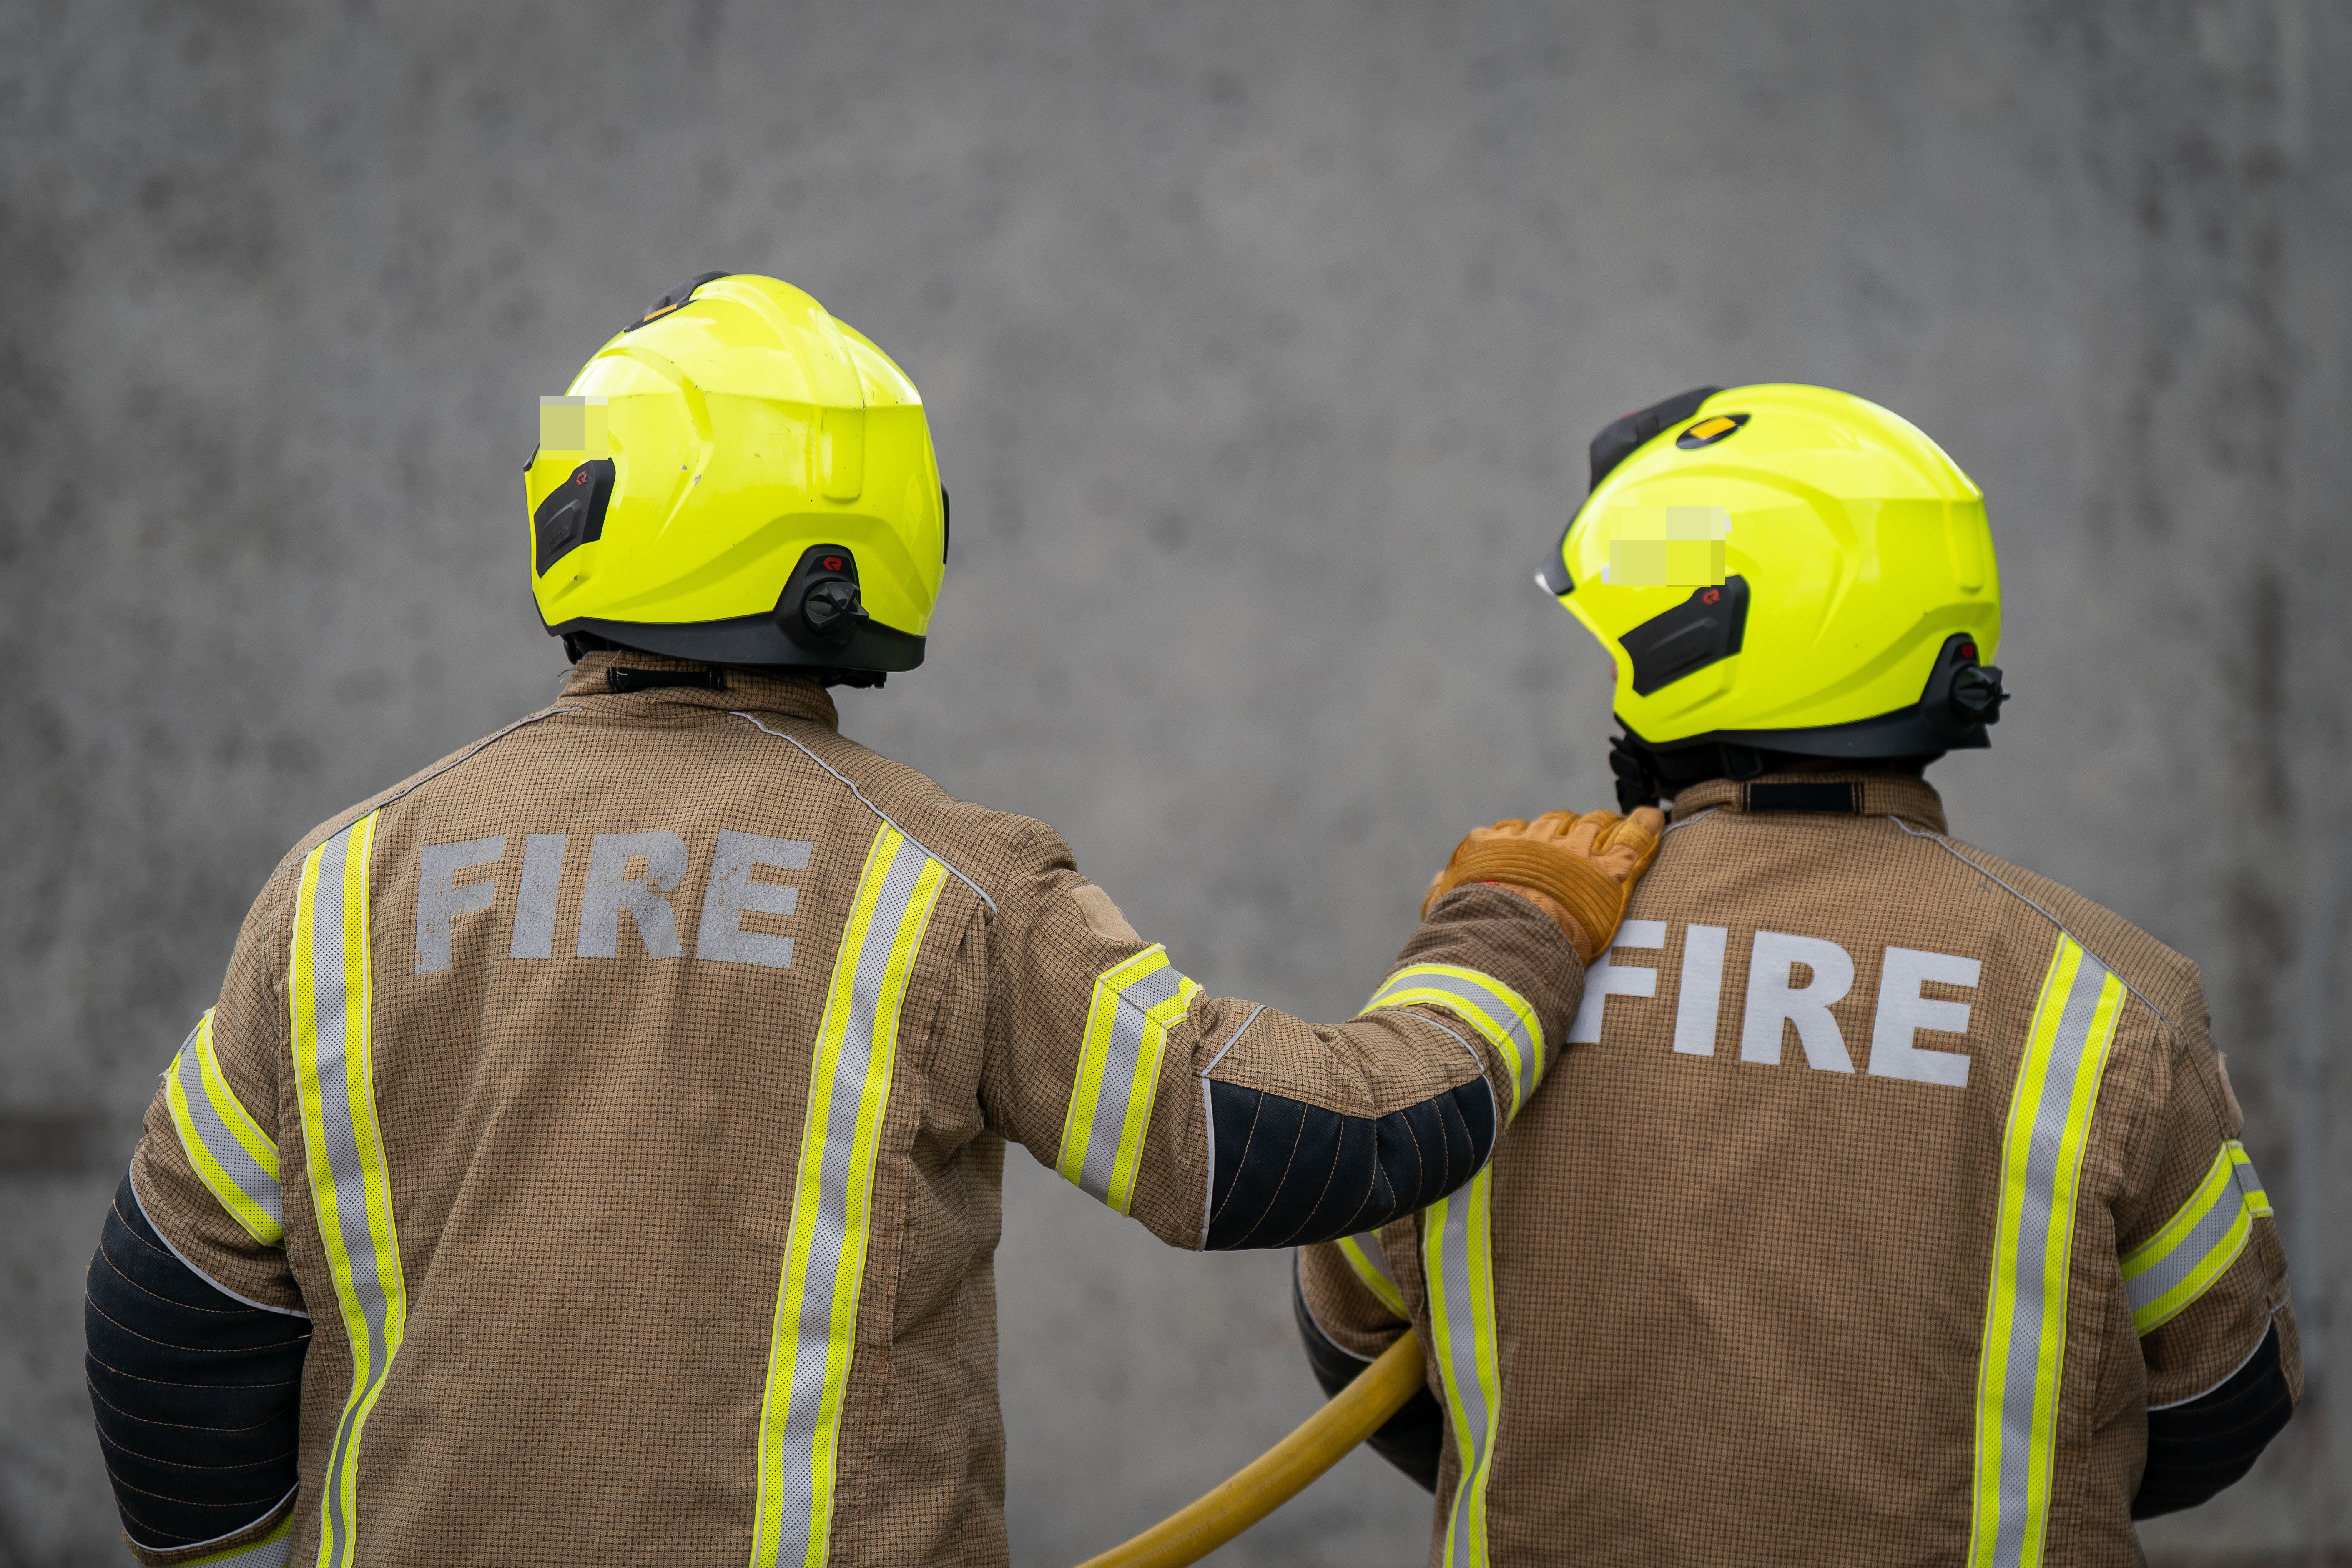 A watchdog warned in March that discrimination, bullying and harassment is rife in fire services